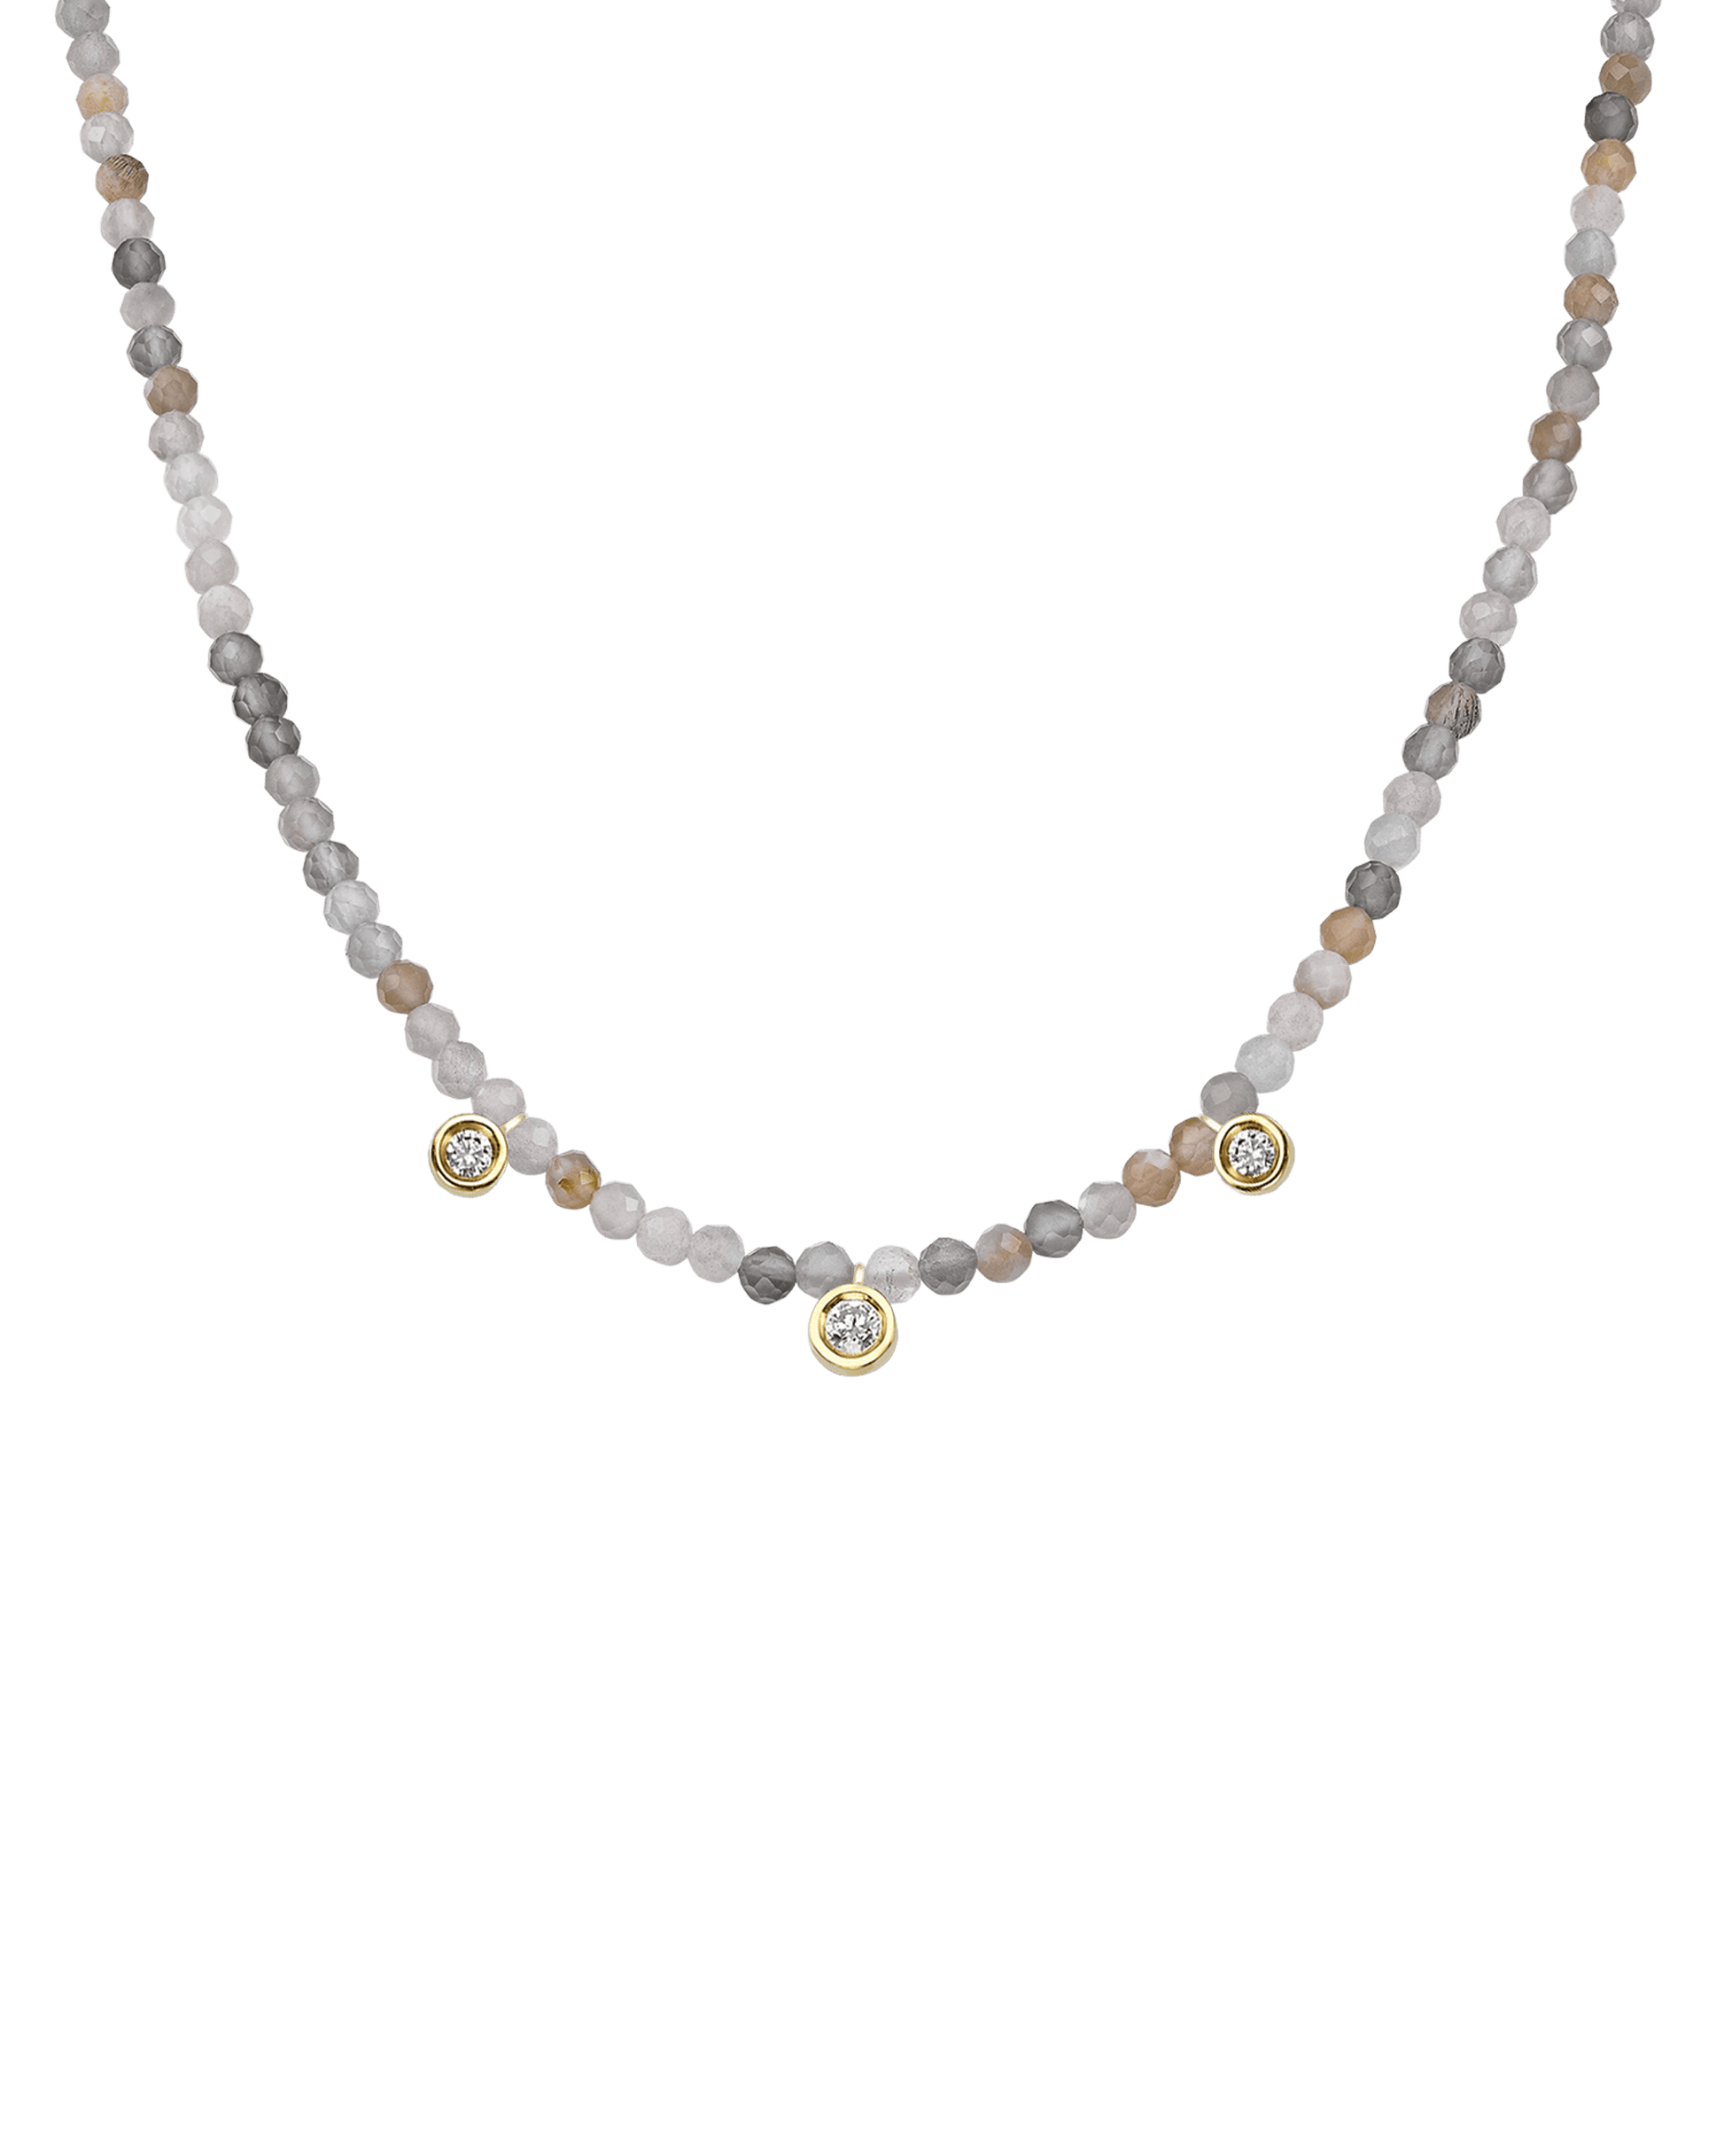 Black Spinel Gemstone & Three diamonds Necklace - 14K Yellow Gold Necklaces magal-dev Natural Moonstone 14" - Collar 